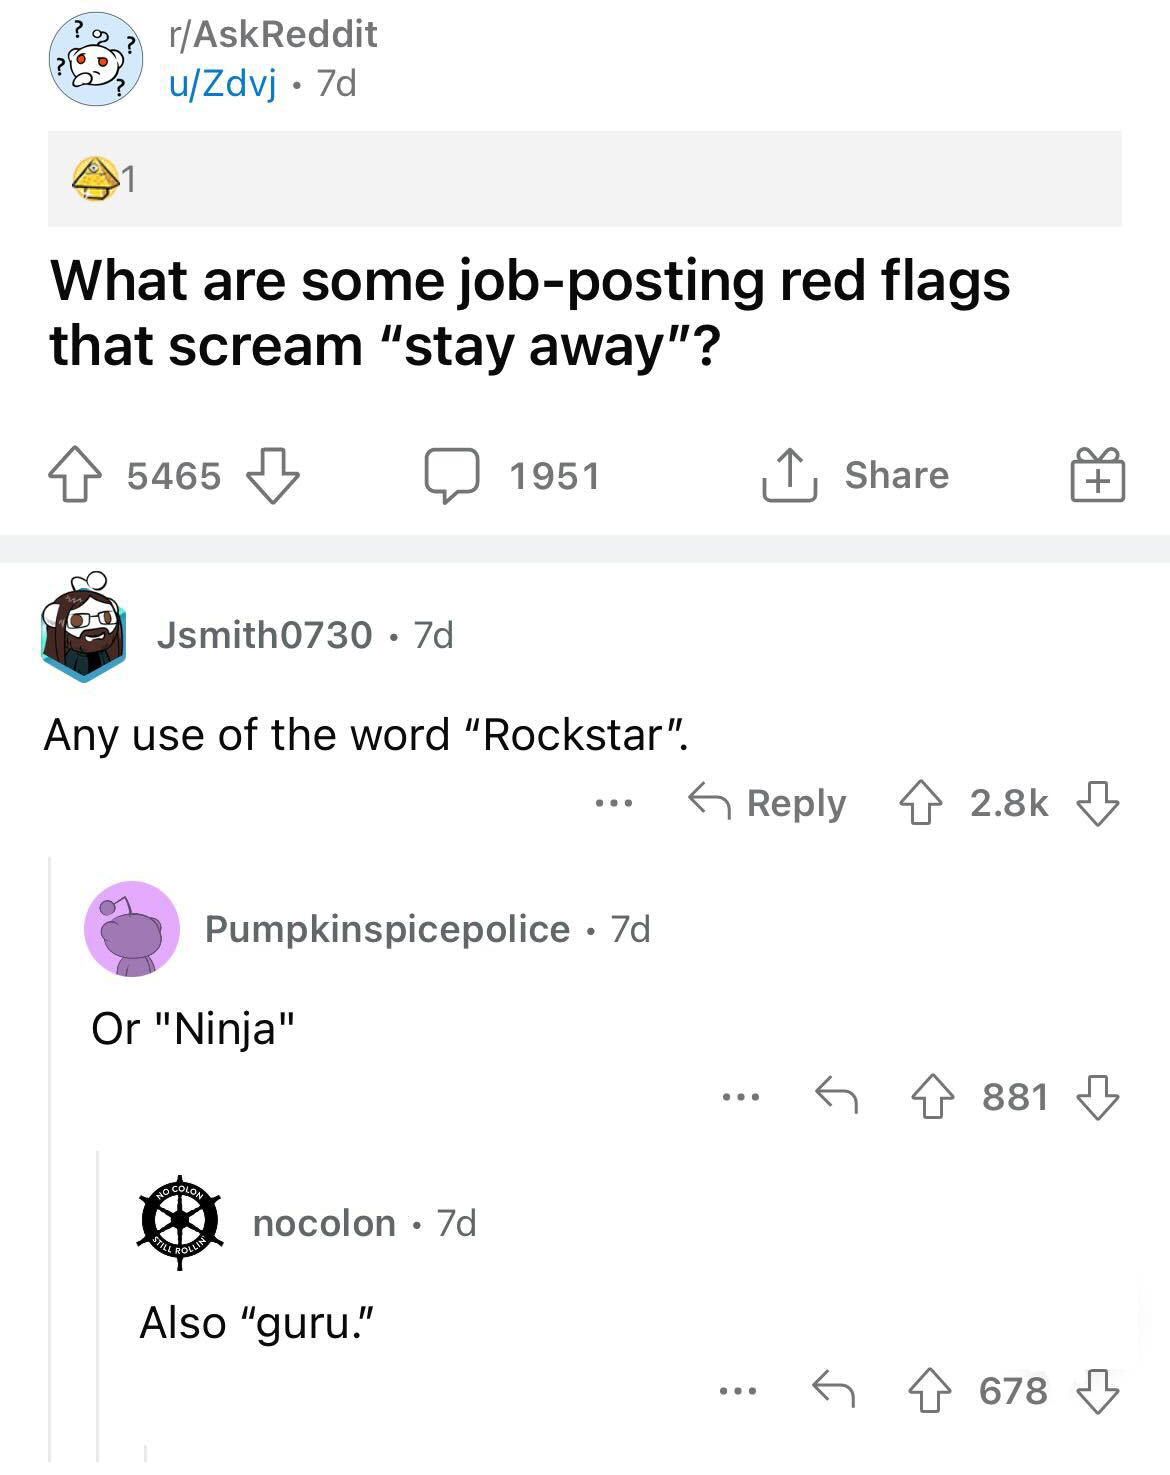 job posting red flags you should avoid - document - rAskReddit uZdvj. 7d What are some jobposting red flags that scream "stay away"? 5465 5465 Jsmith0730 7d Any use of the word "Rockstar". Or "Ninja" Pumpkinspicepolice 7d No Colon Will Rollin 1951 nocolon